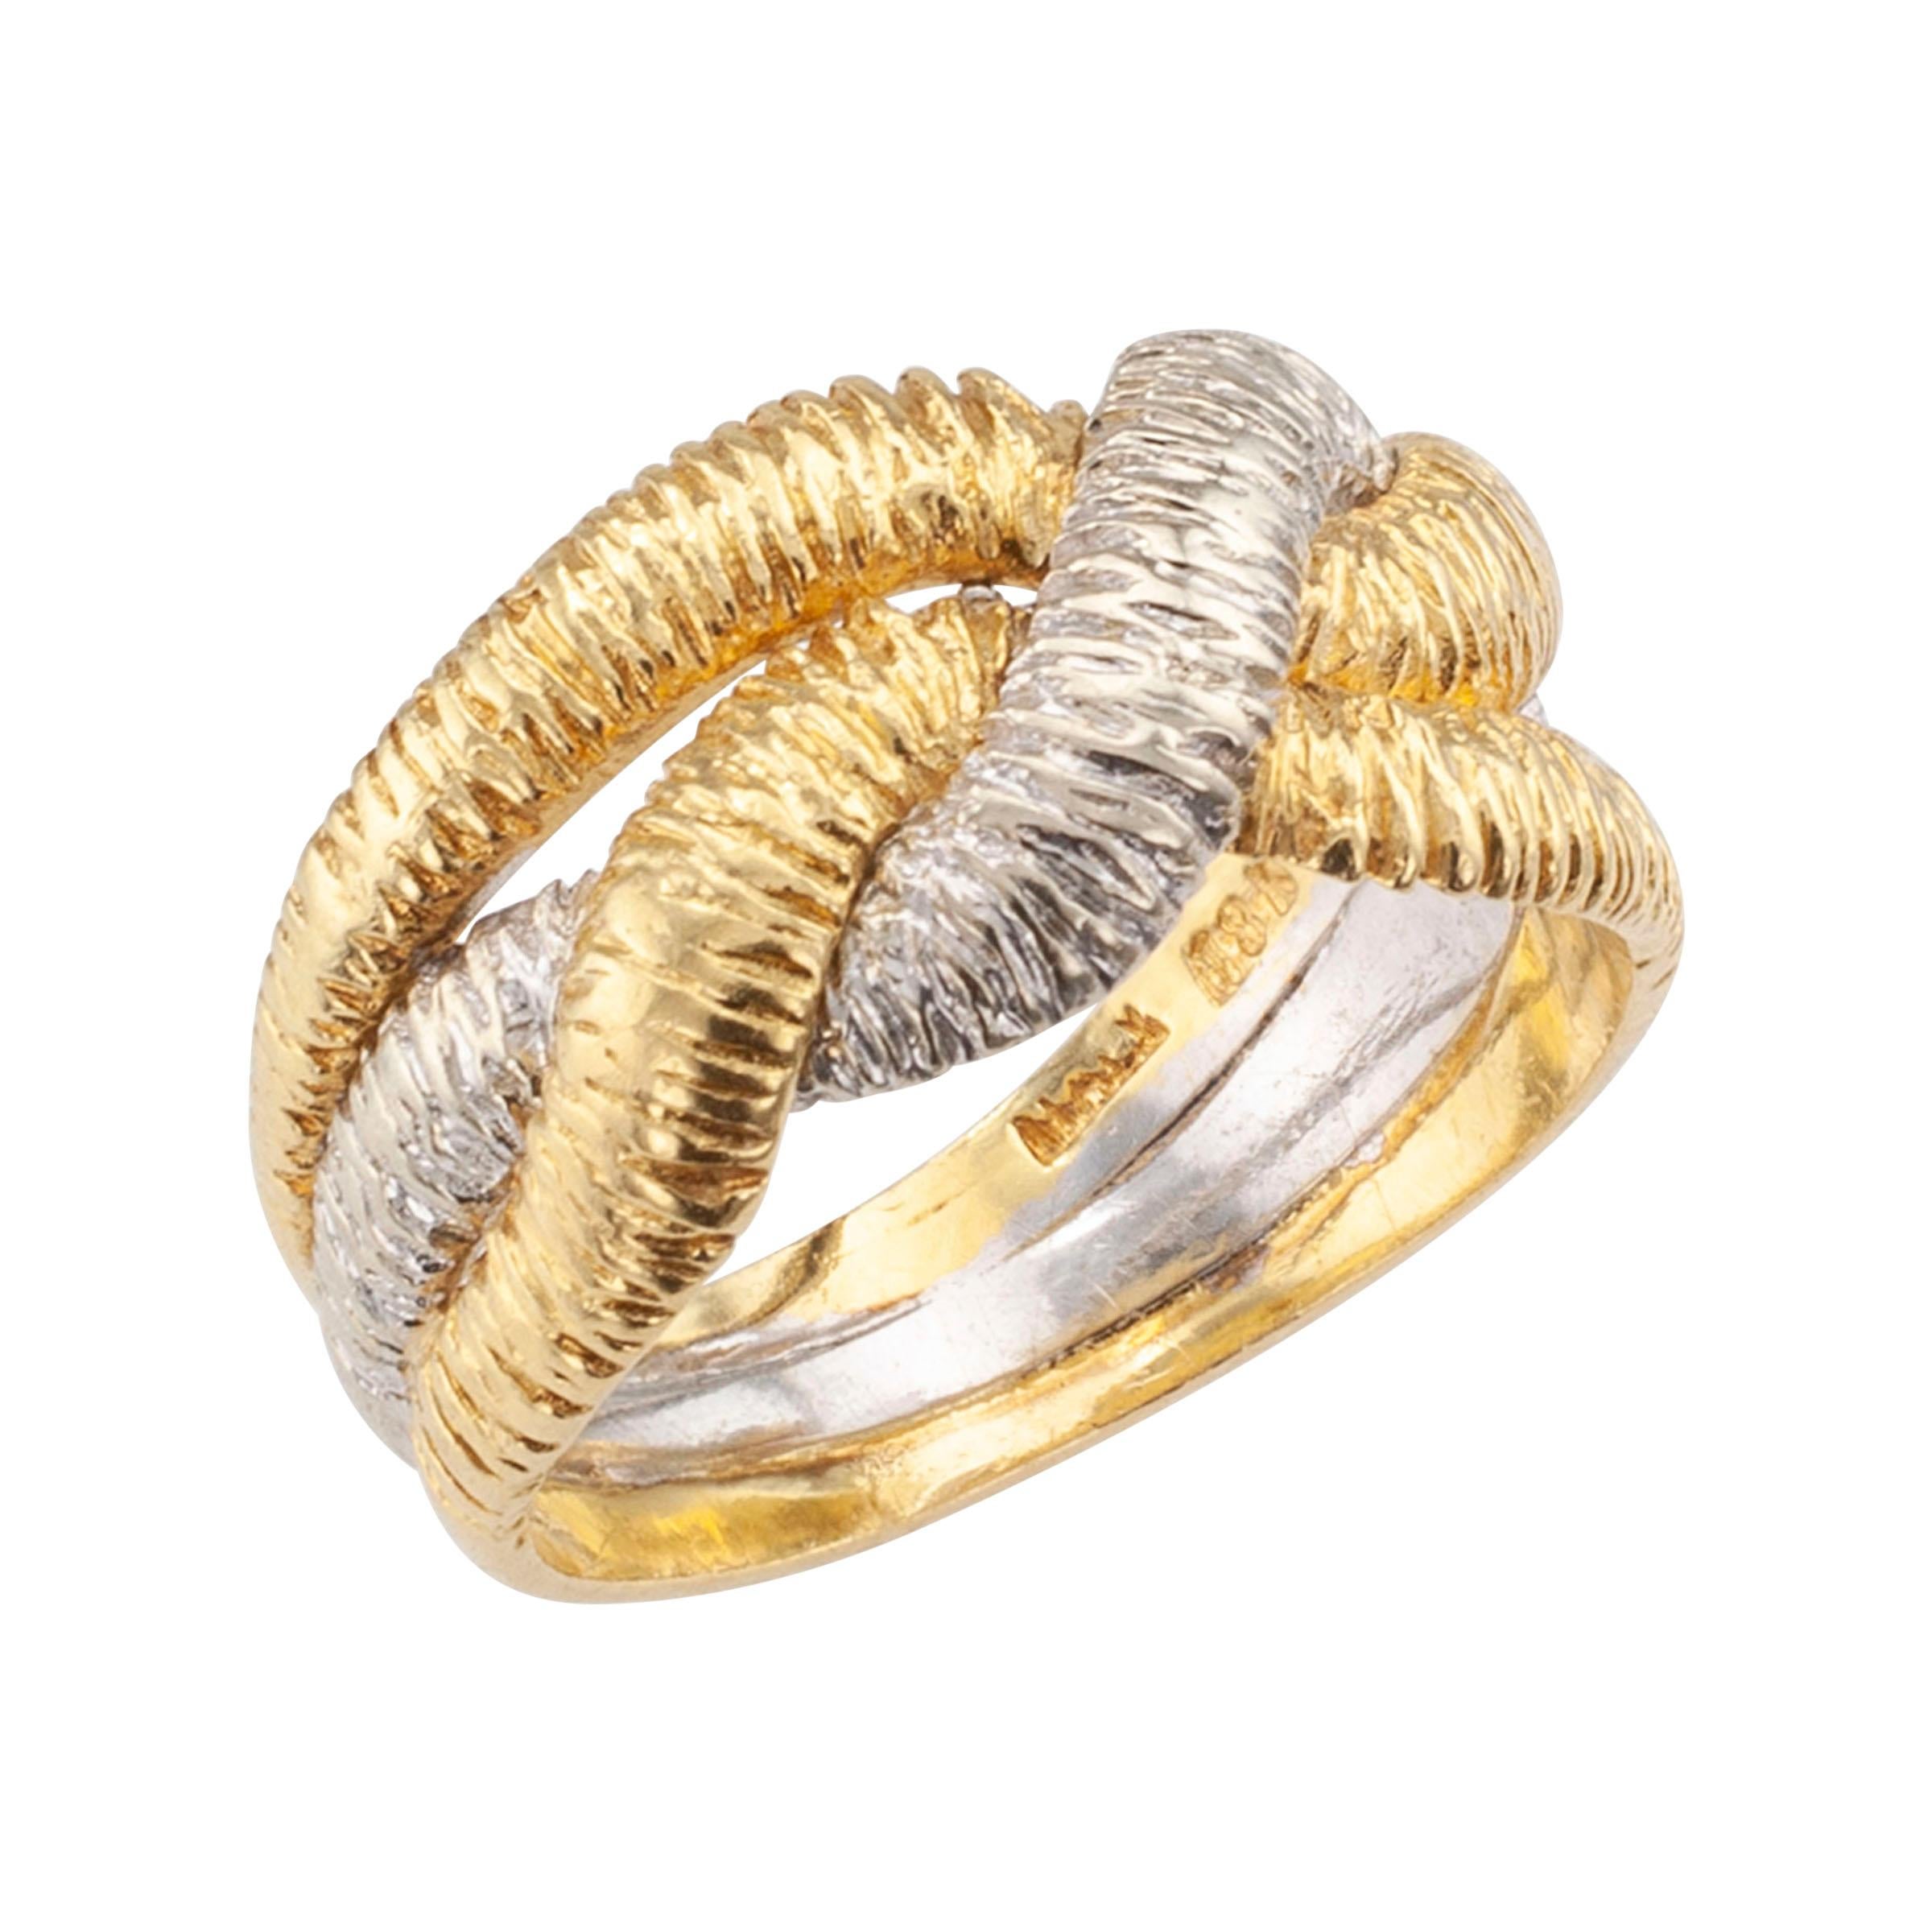 Textured two-tone gold ring band circa 1960 .

DETAILS: 
Entwined and textured two-tone gold ring band.
METAL: yellow and white 18-karat gold
RING SIZE: approximately 5 ½.
MEASUREMENTS: approximately 3/8” (10 mm) wide vertical to the fingernail.